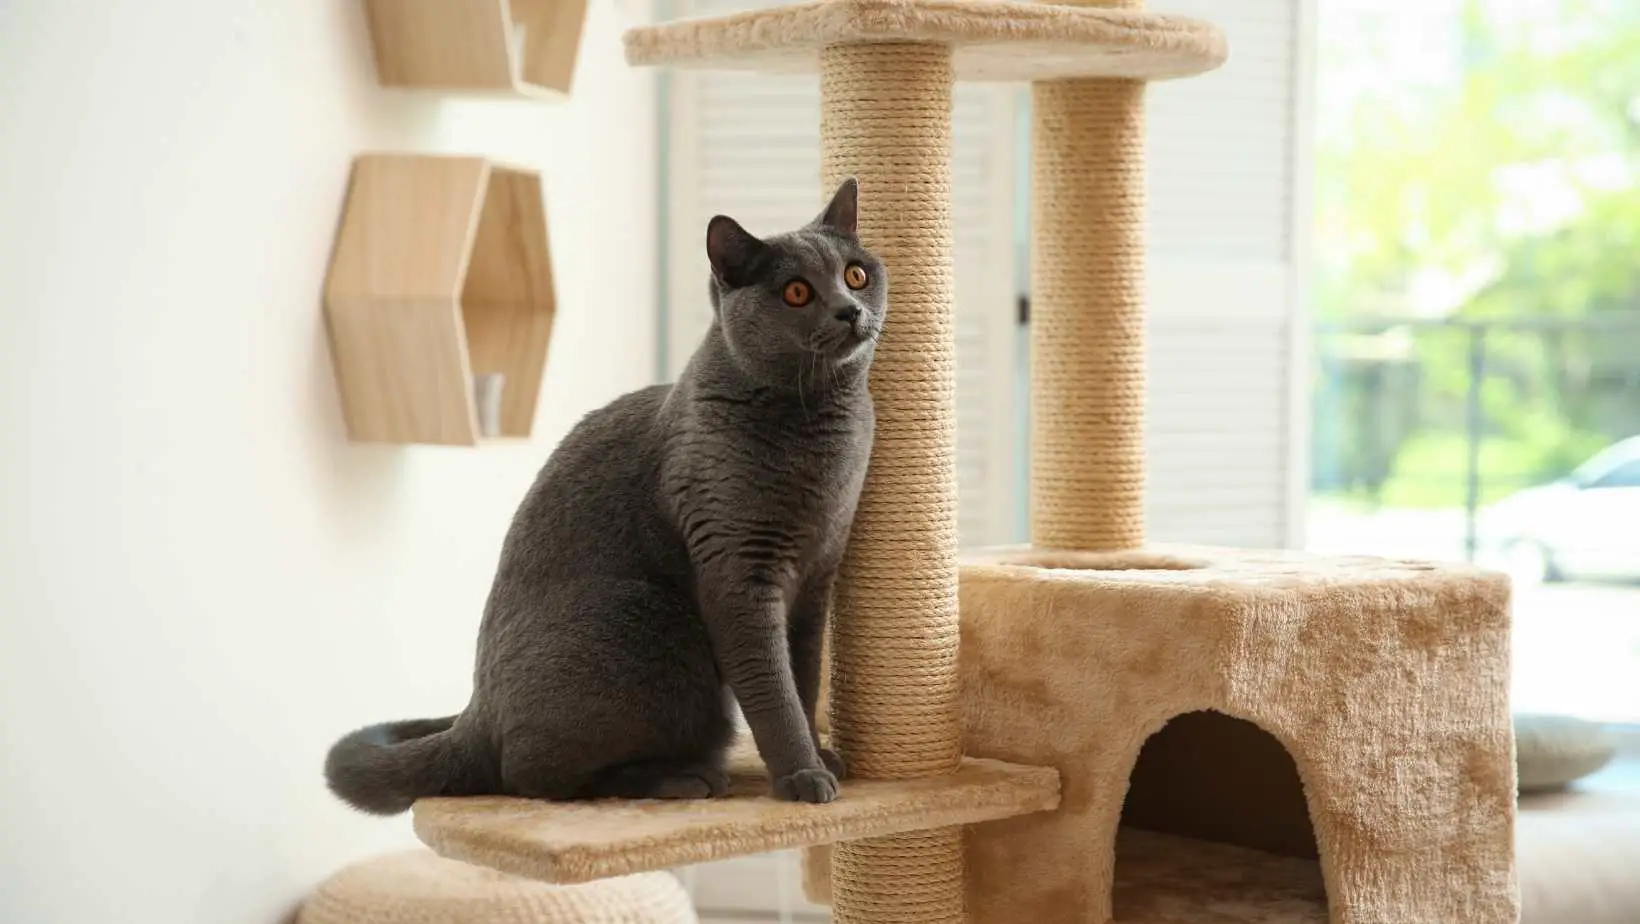 Why Do My Cats Love This Cat Tree So Much?